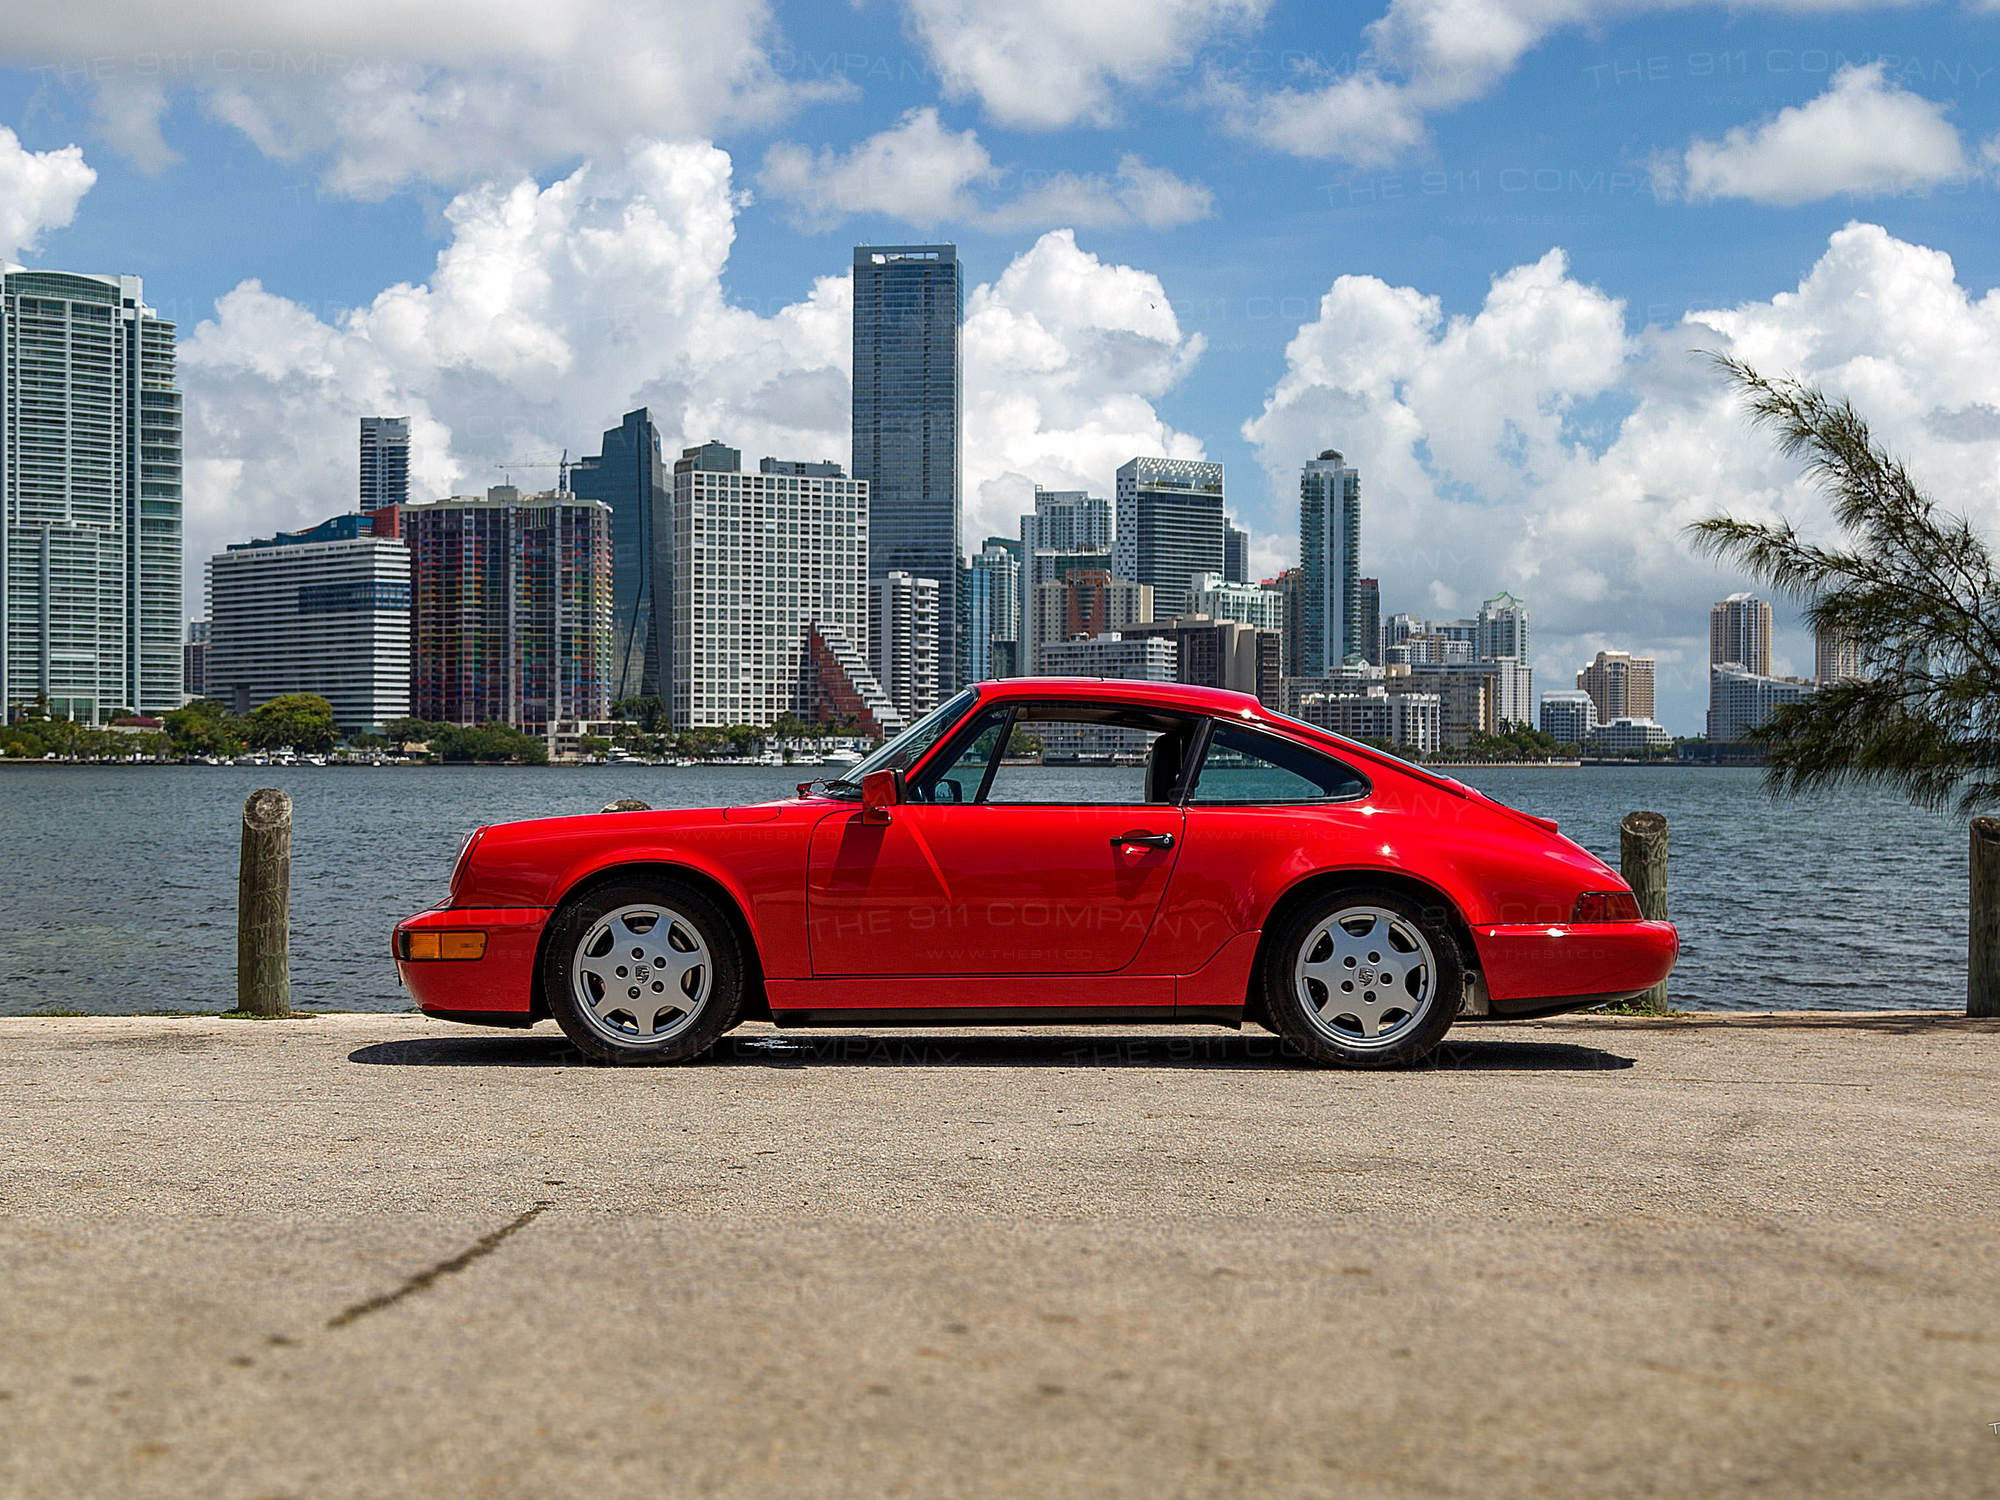 This Porsche Coupe is for those who want a classic car that offers a modern drive.